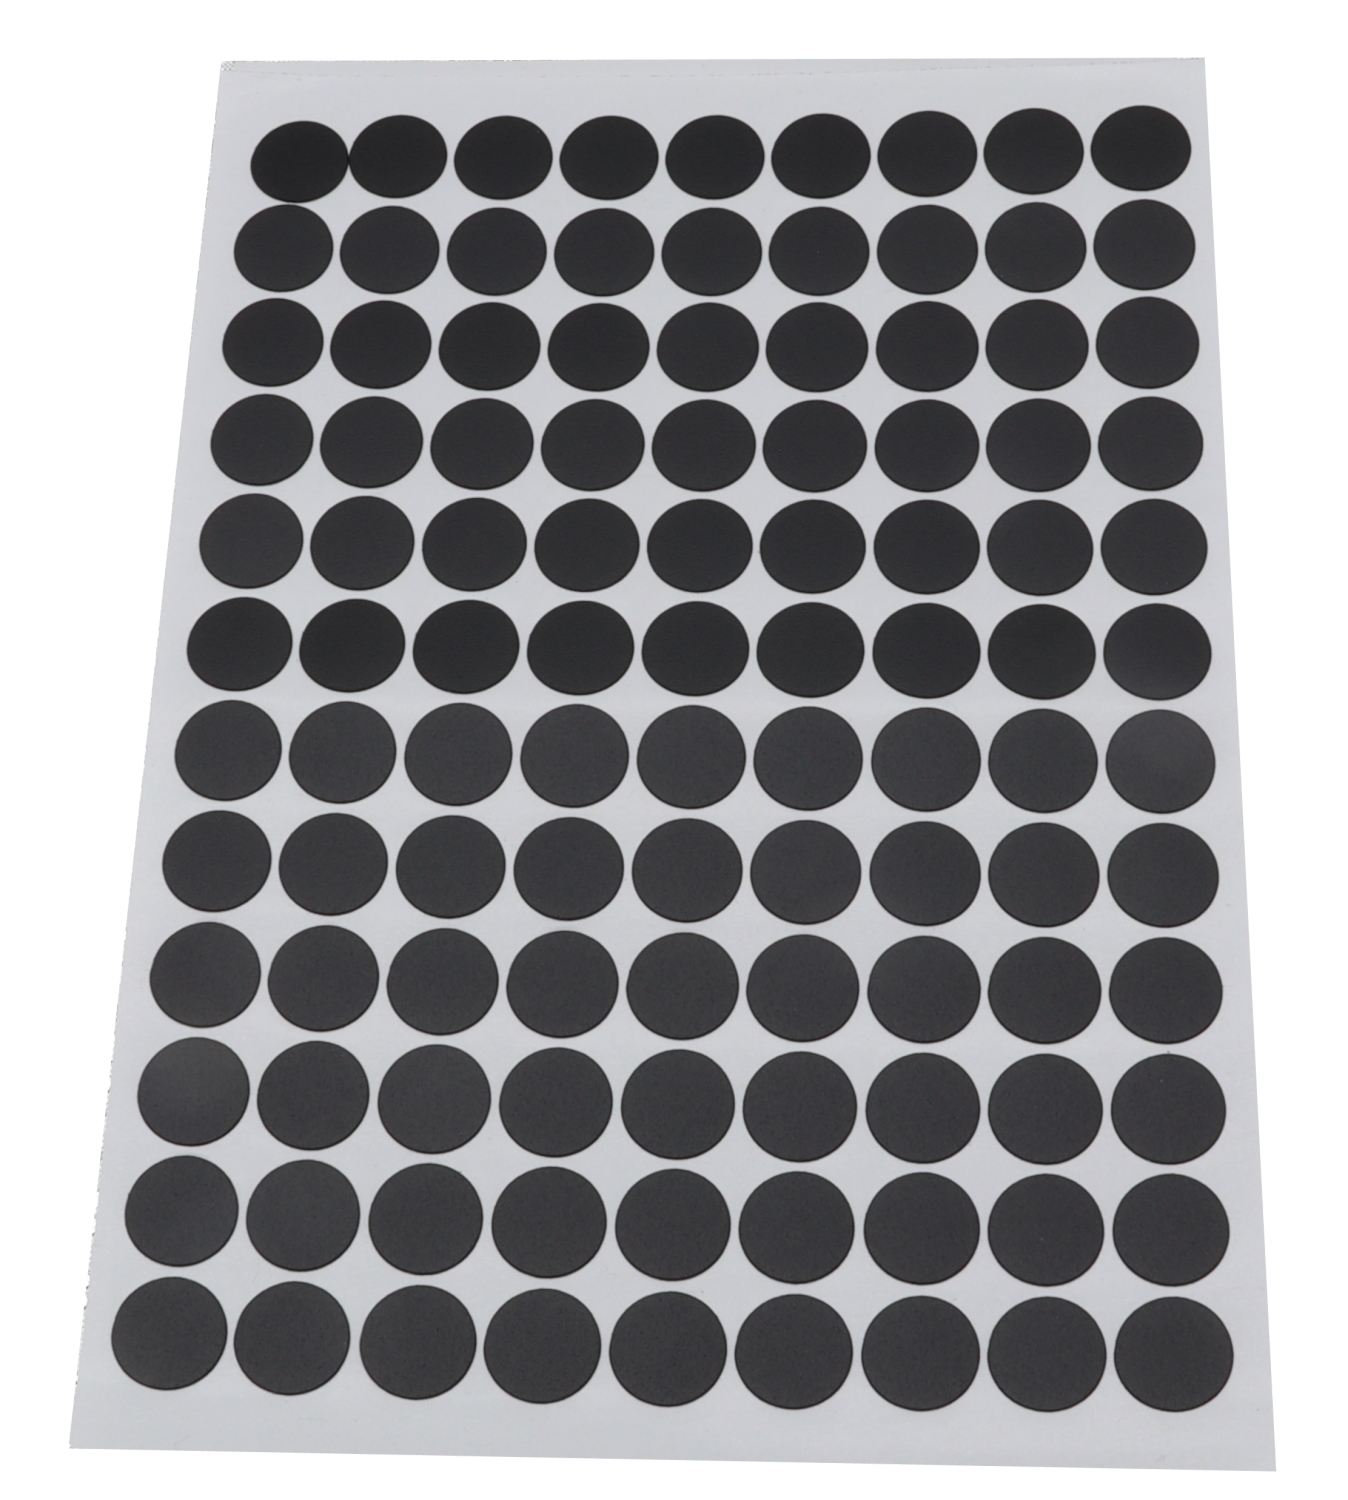 Image Adhesive PVC screw cover, textured black (sheet of 108 stickers), 14 mm diamater